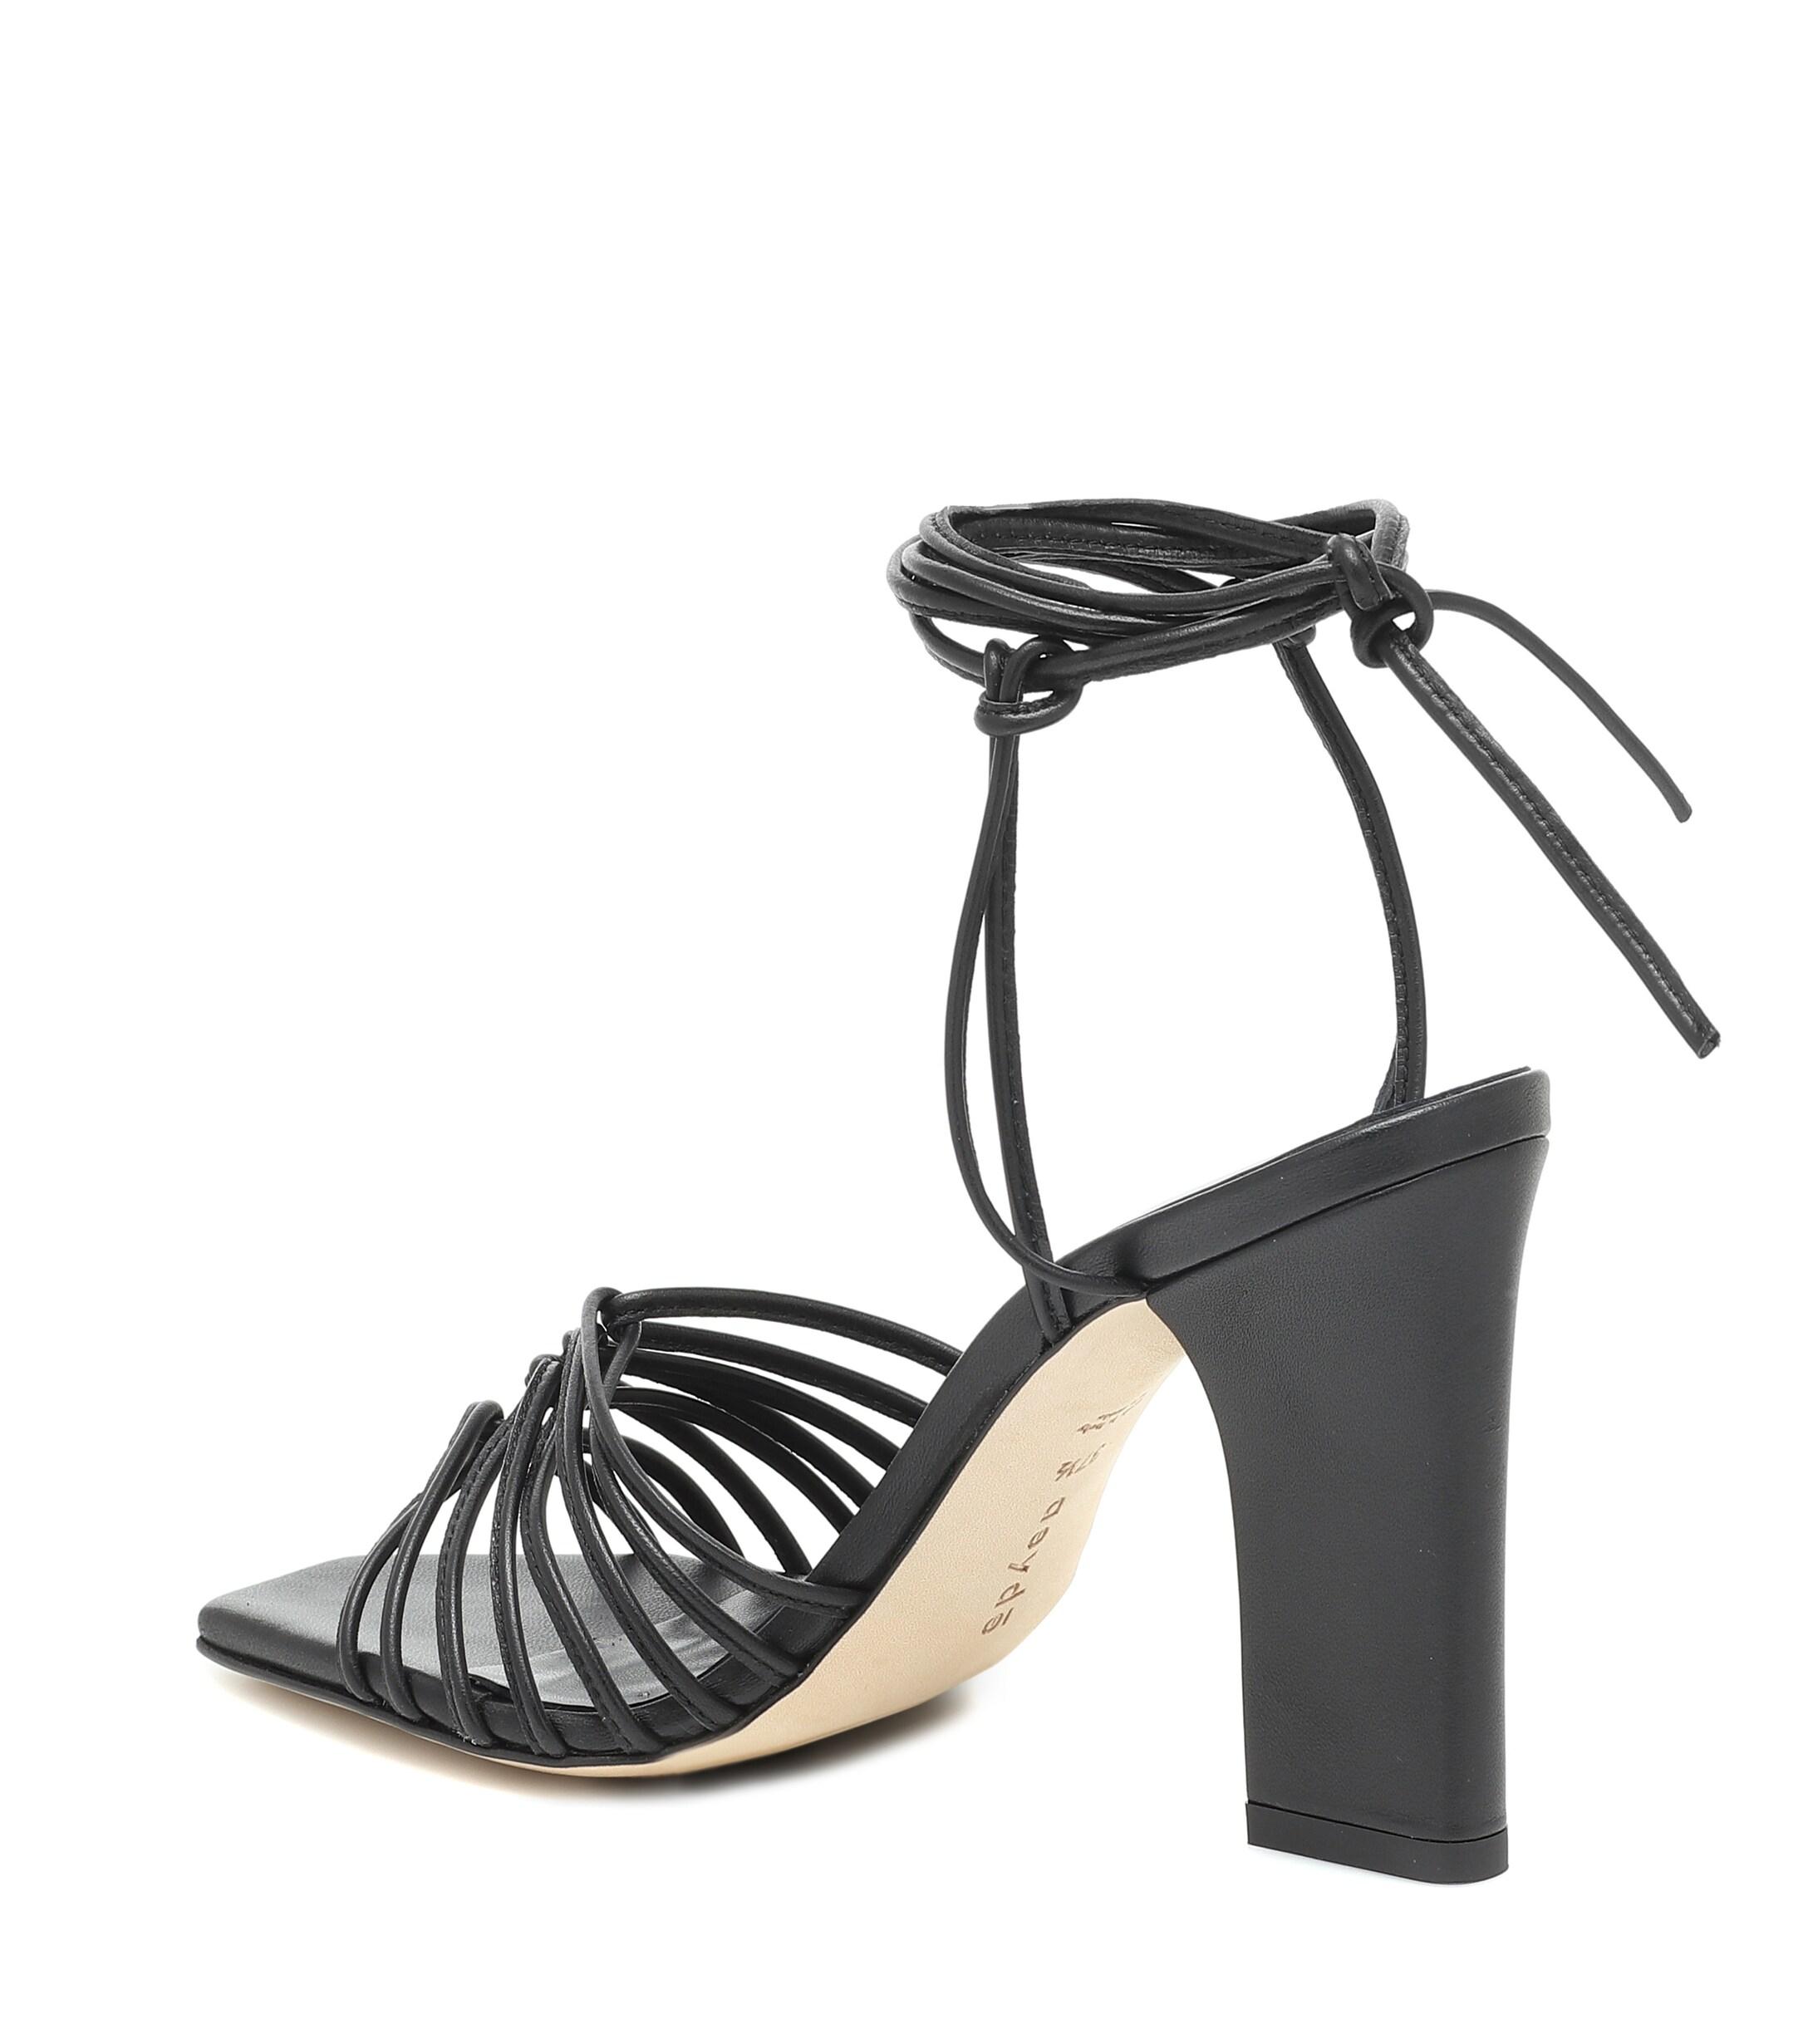 Aeyde Daisy Leather Sandals in Black - Lyst